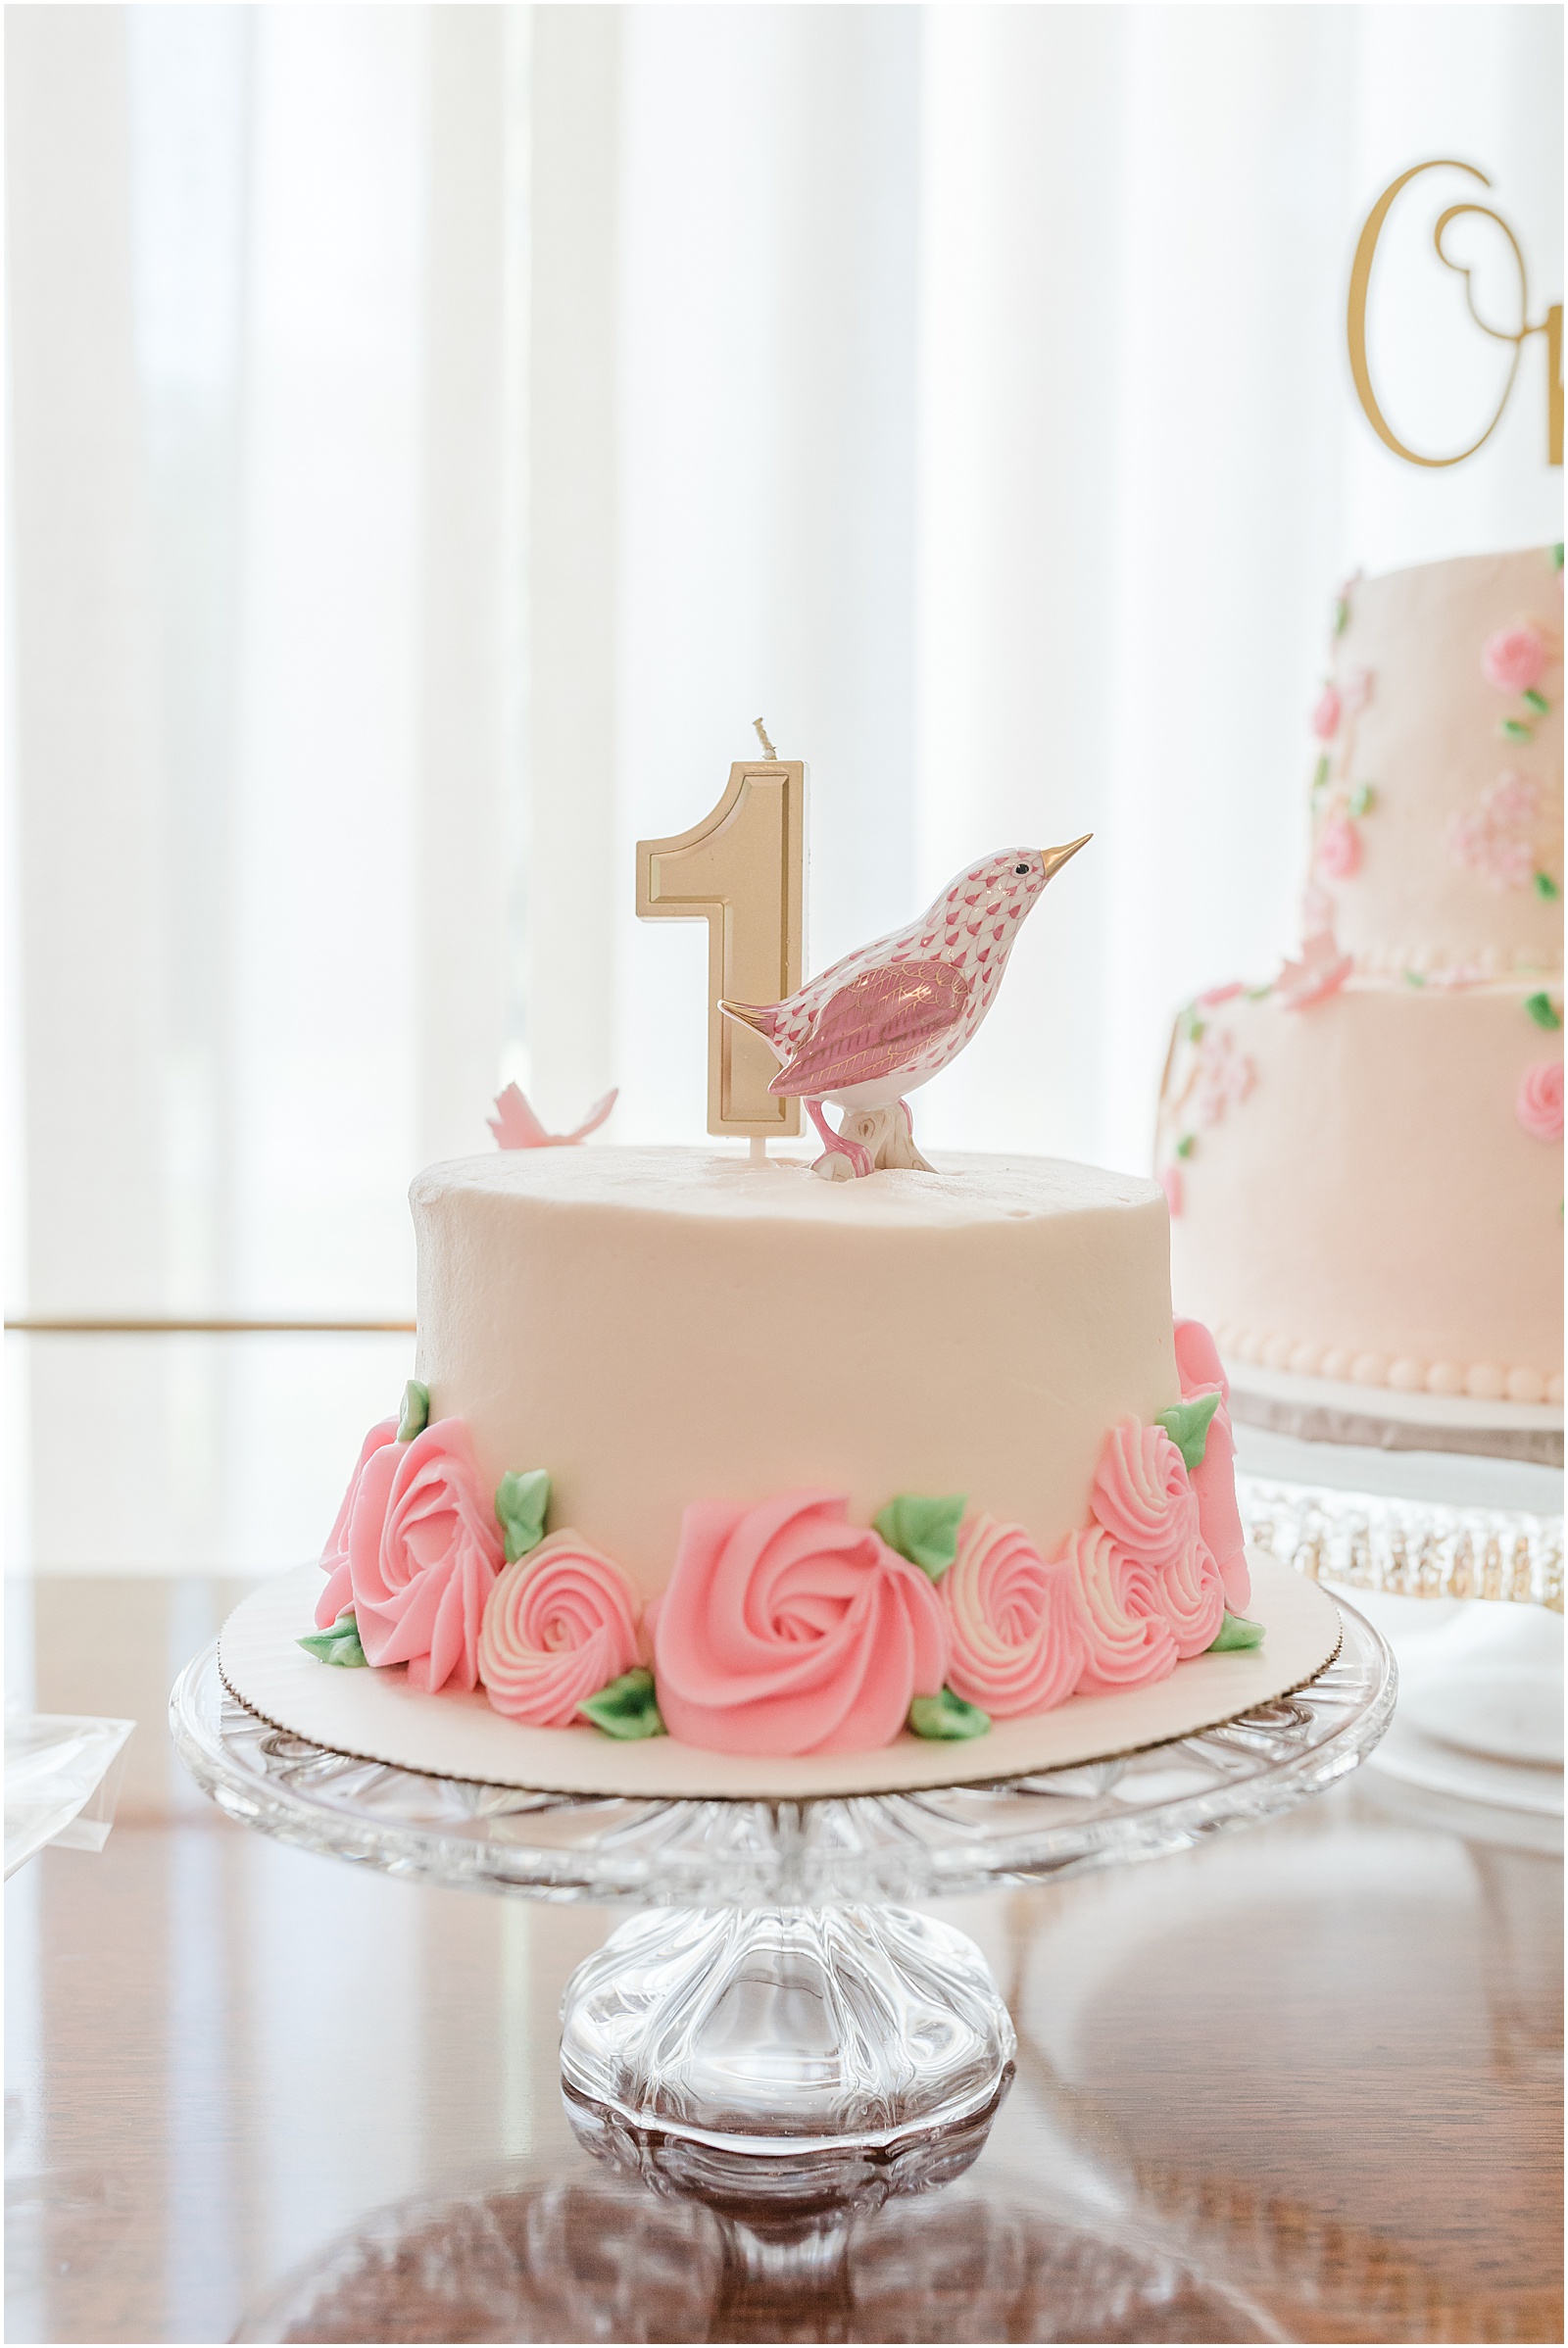 Greenville baby photographer's photos of a smash cake that is pink floral with a Herend cake topper